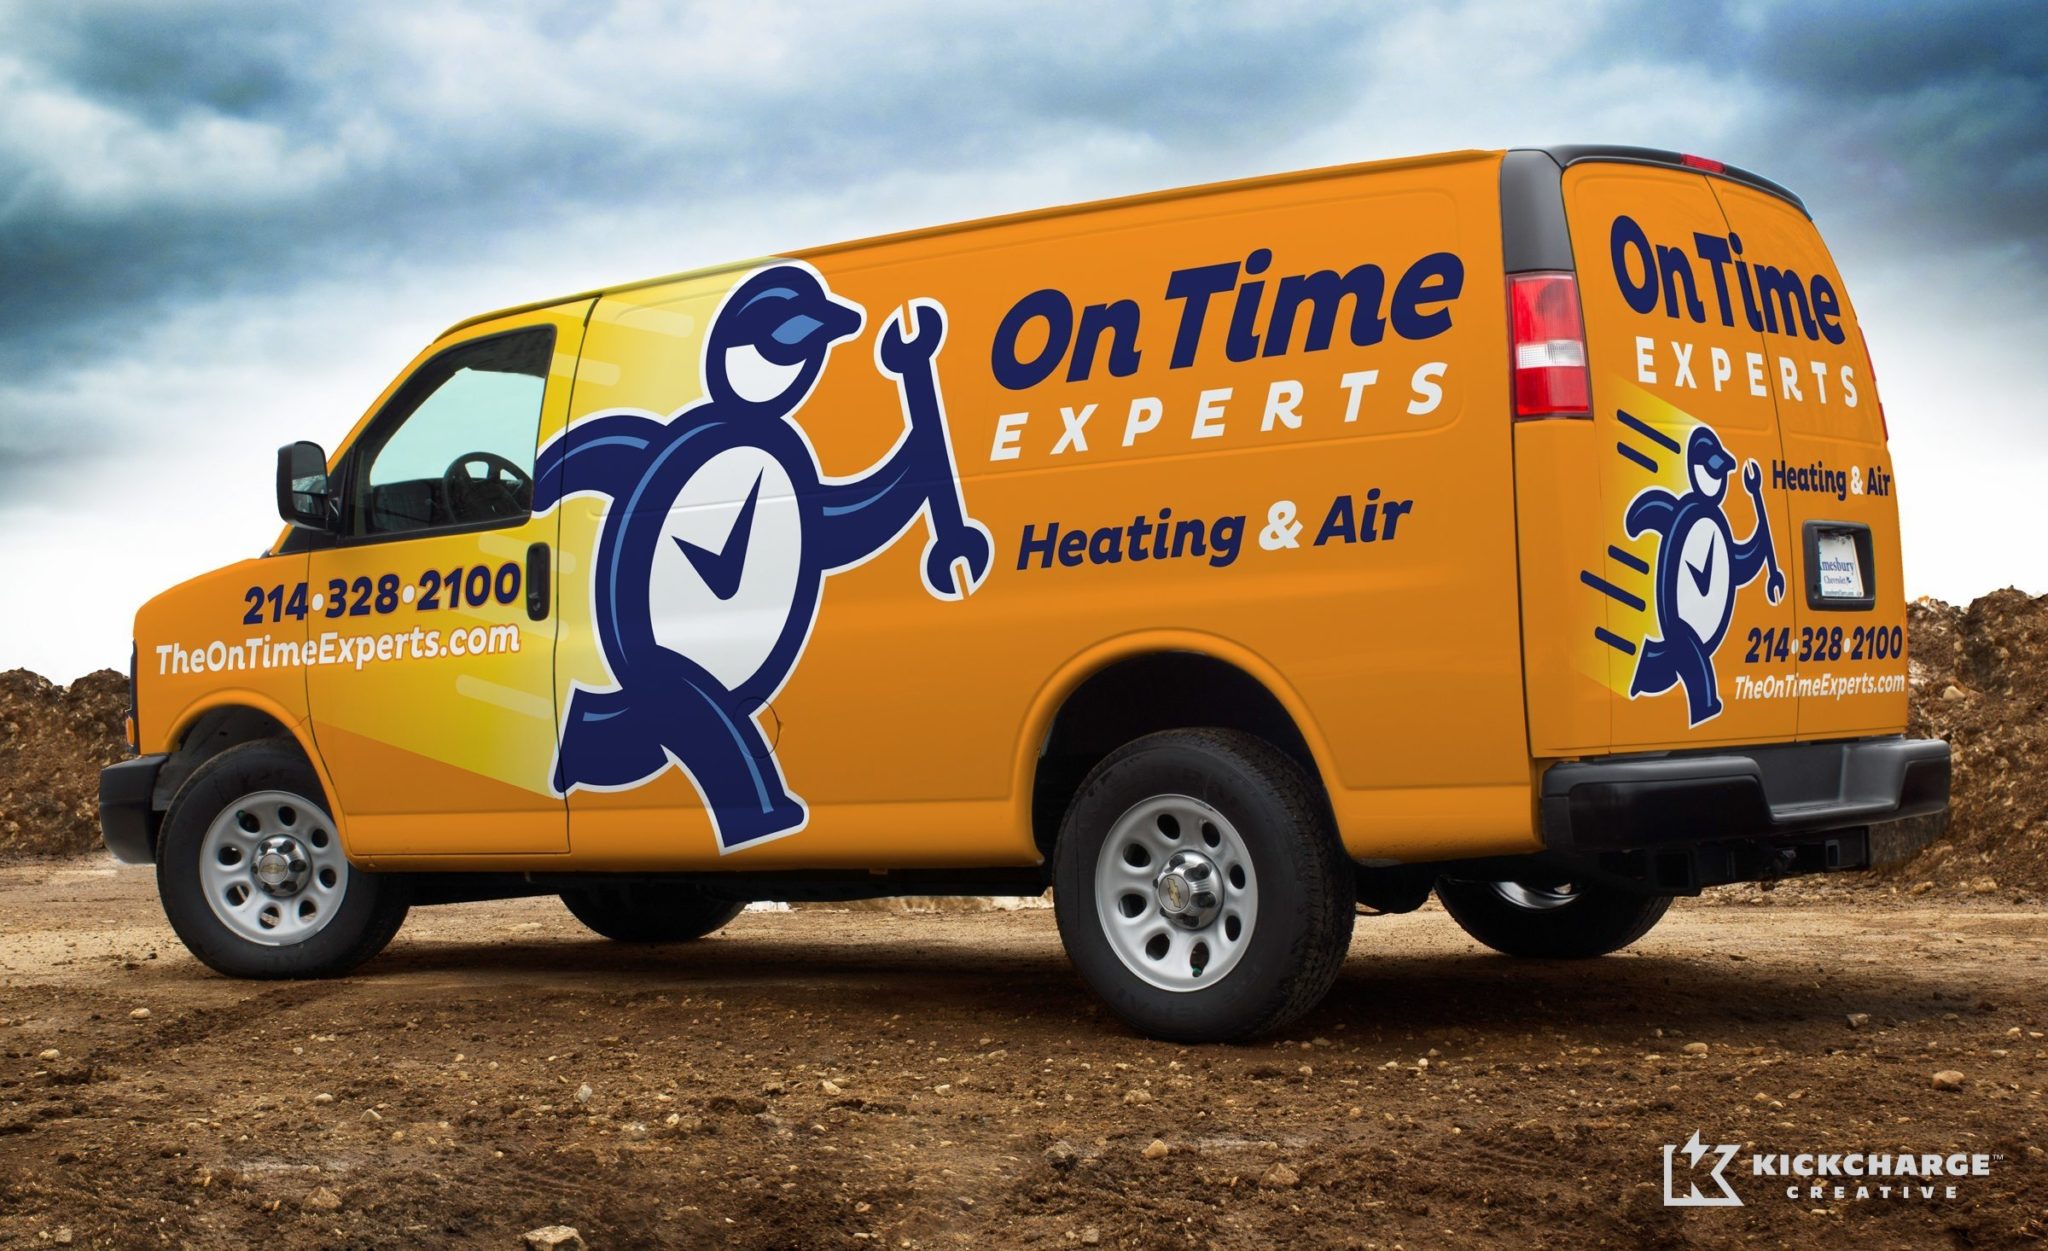 New identity, naming and truck wrap design integrated on a fleet of service vehicles for this Texas HVAC company.